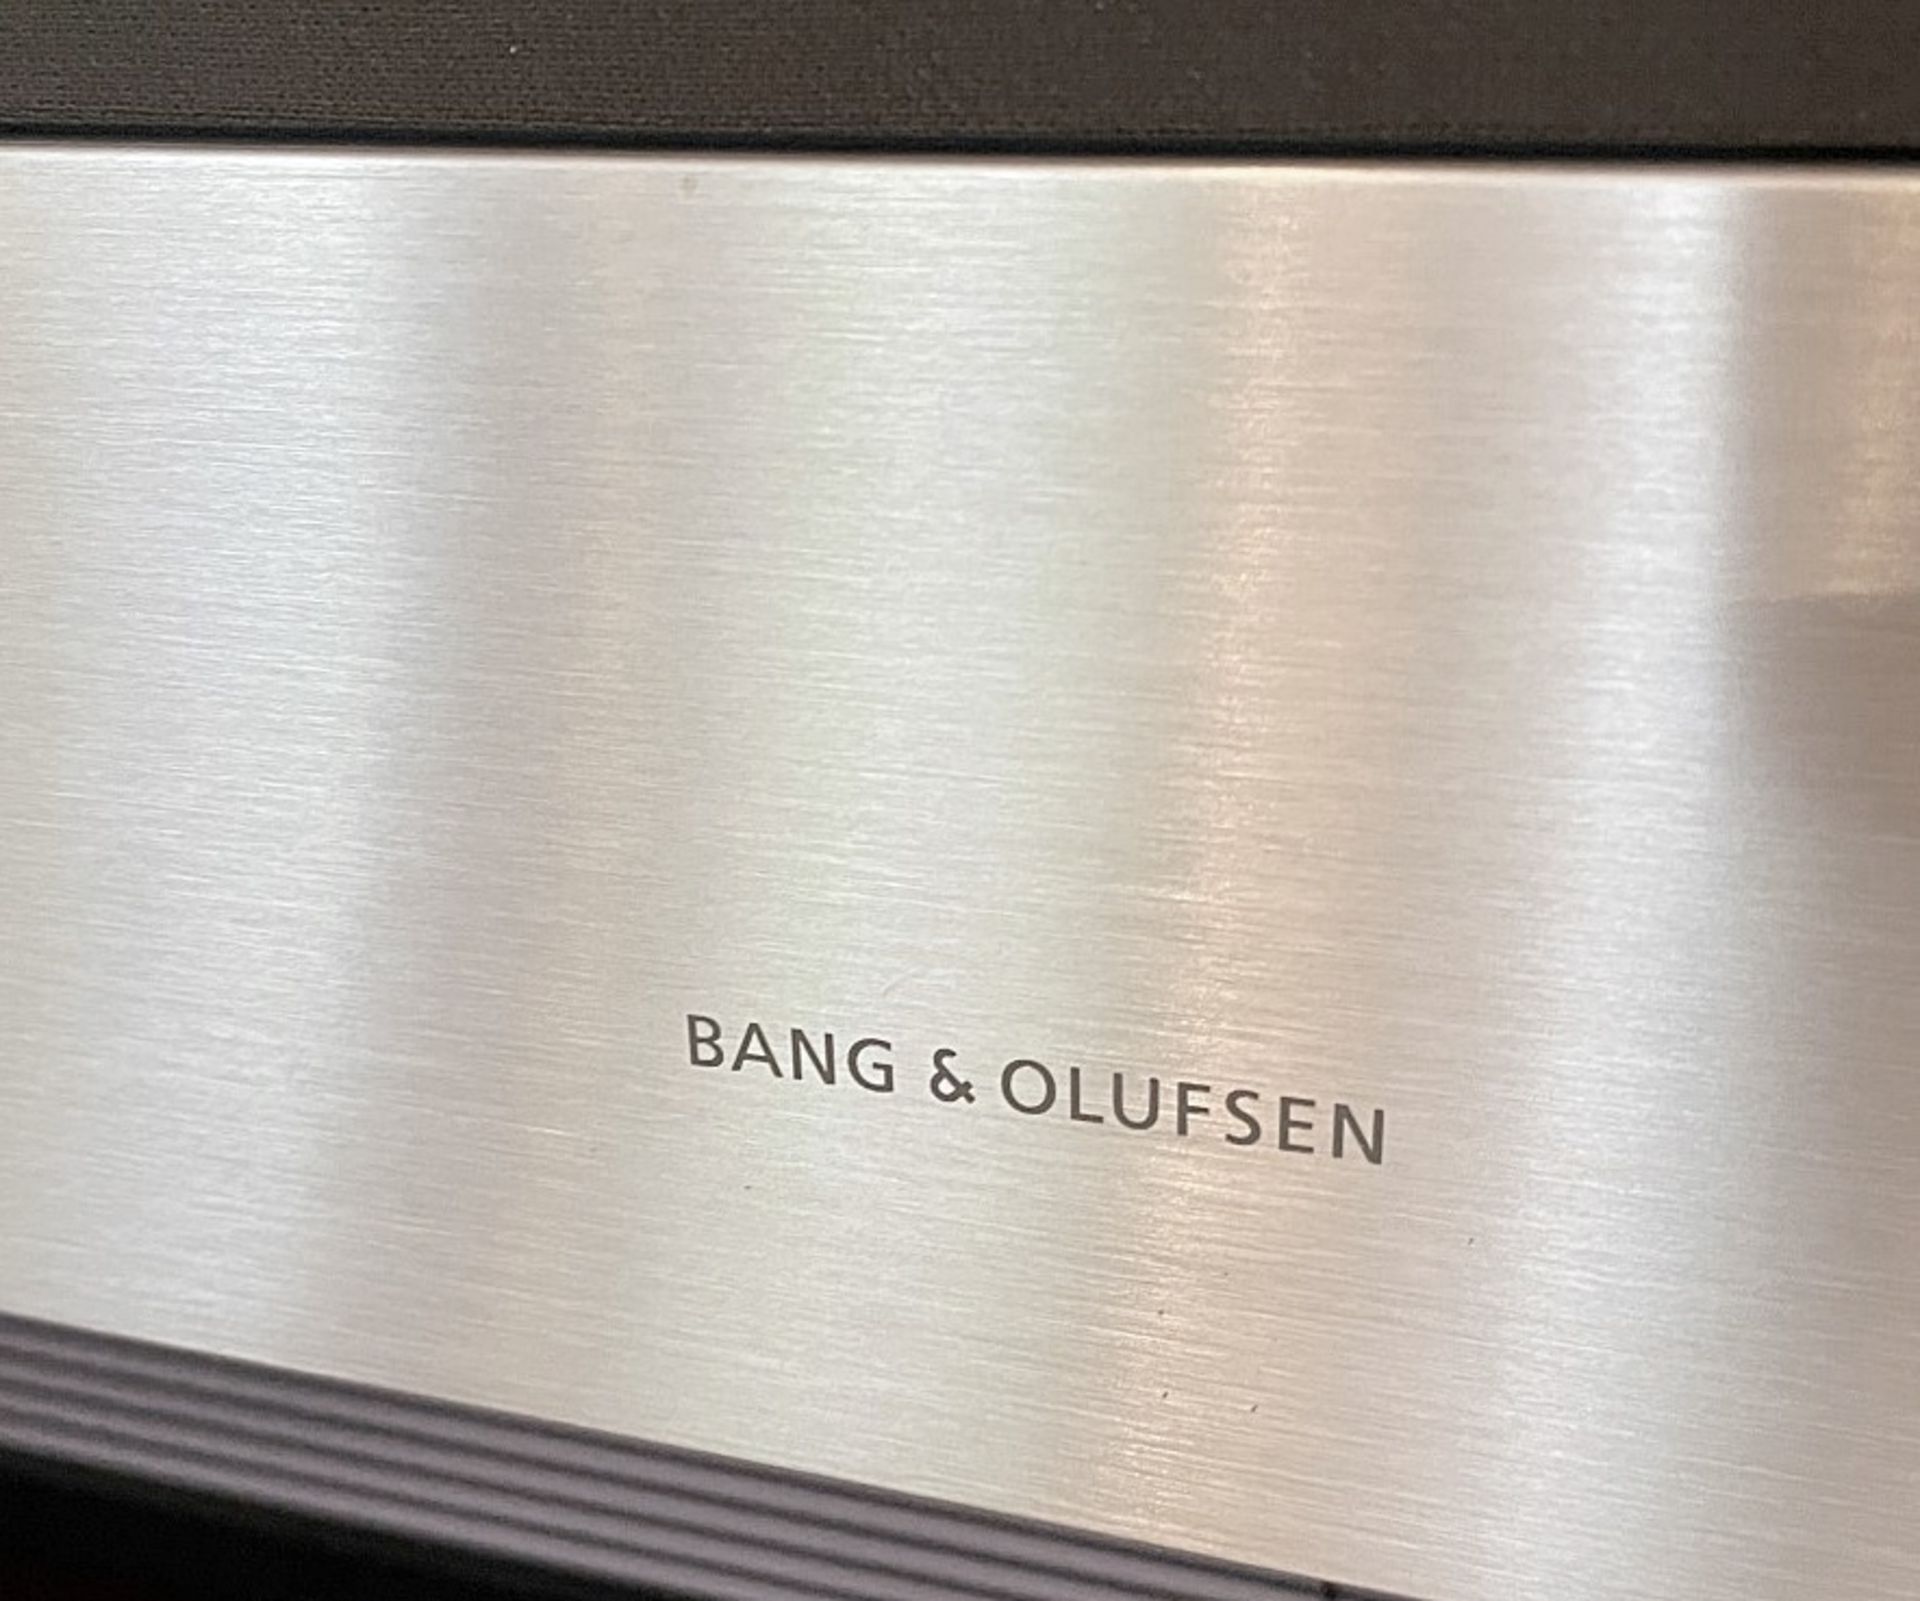 1 x BANG & OLUFSEN Wall Mounted Television In A Stainless Steel Frame, With Remote Control - Image 3 of 9